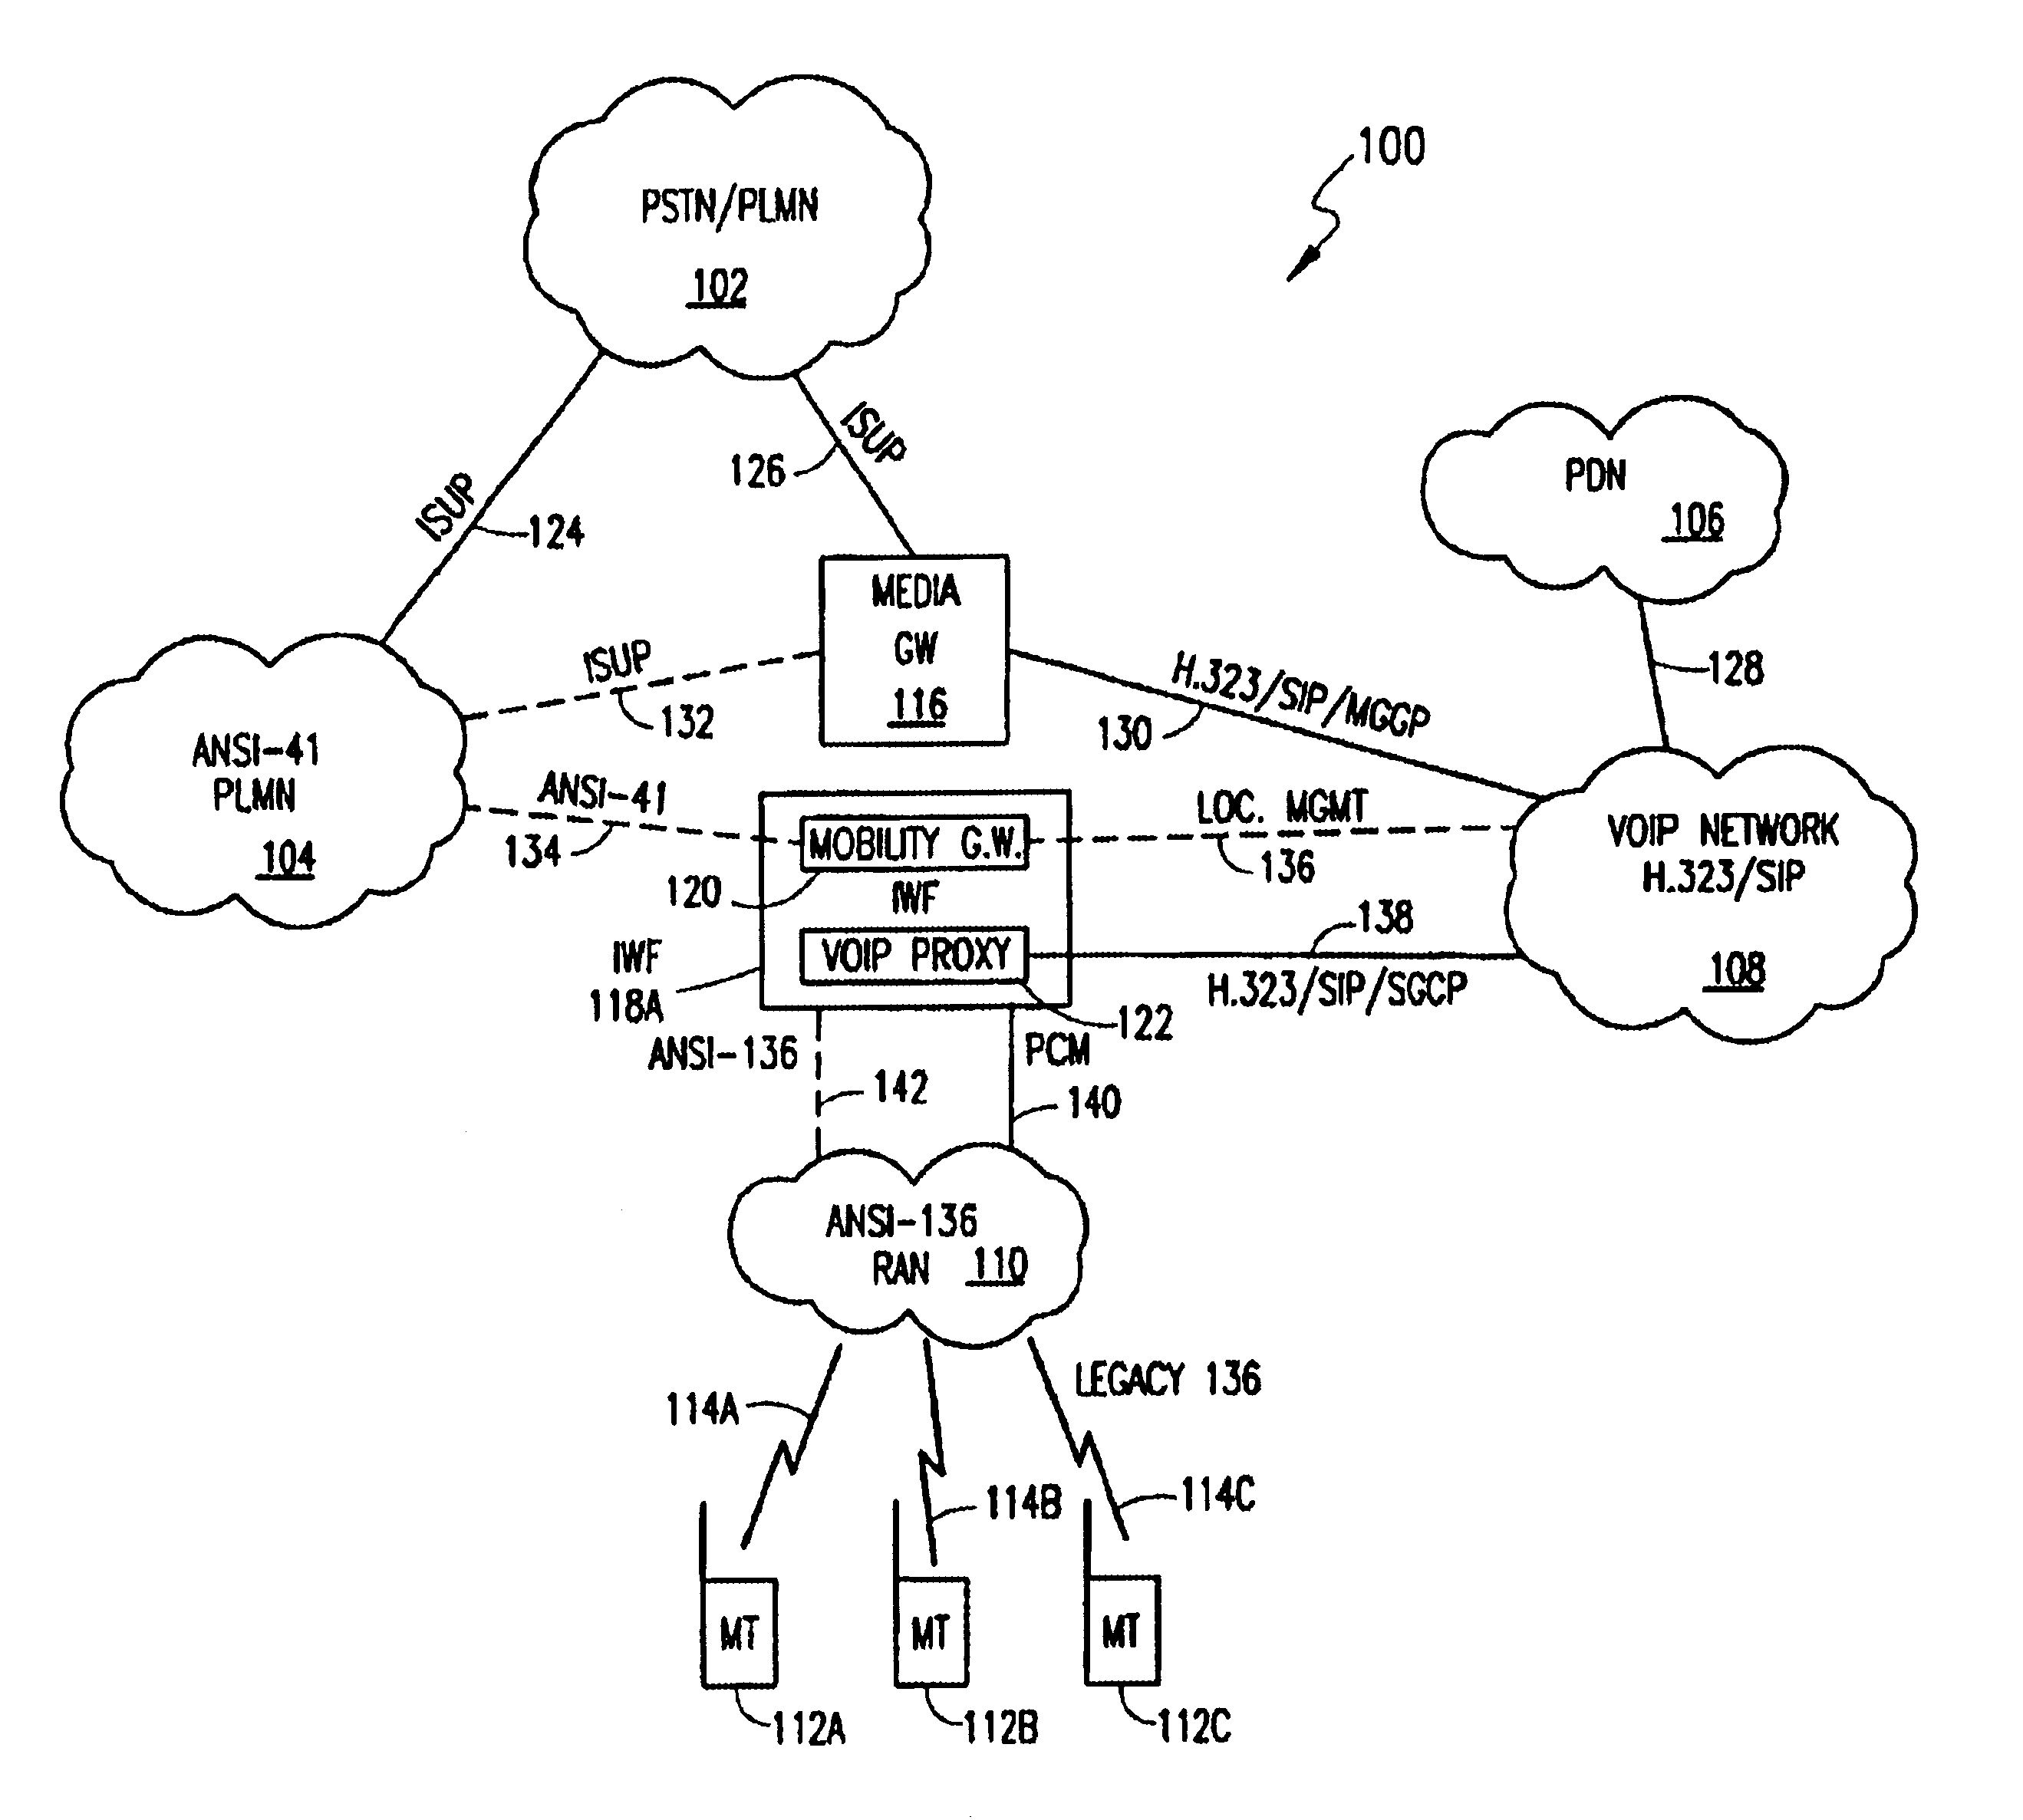 System and method for providing wireless telephony over a packet-switched network